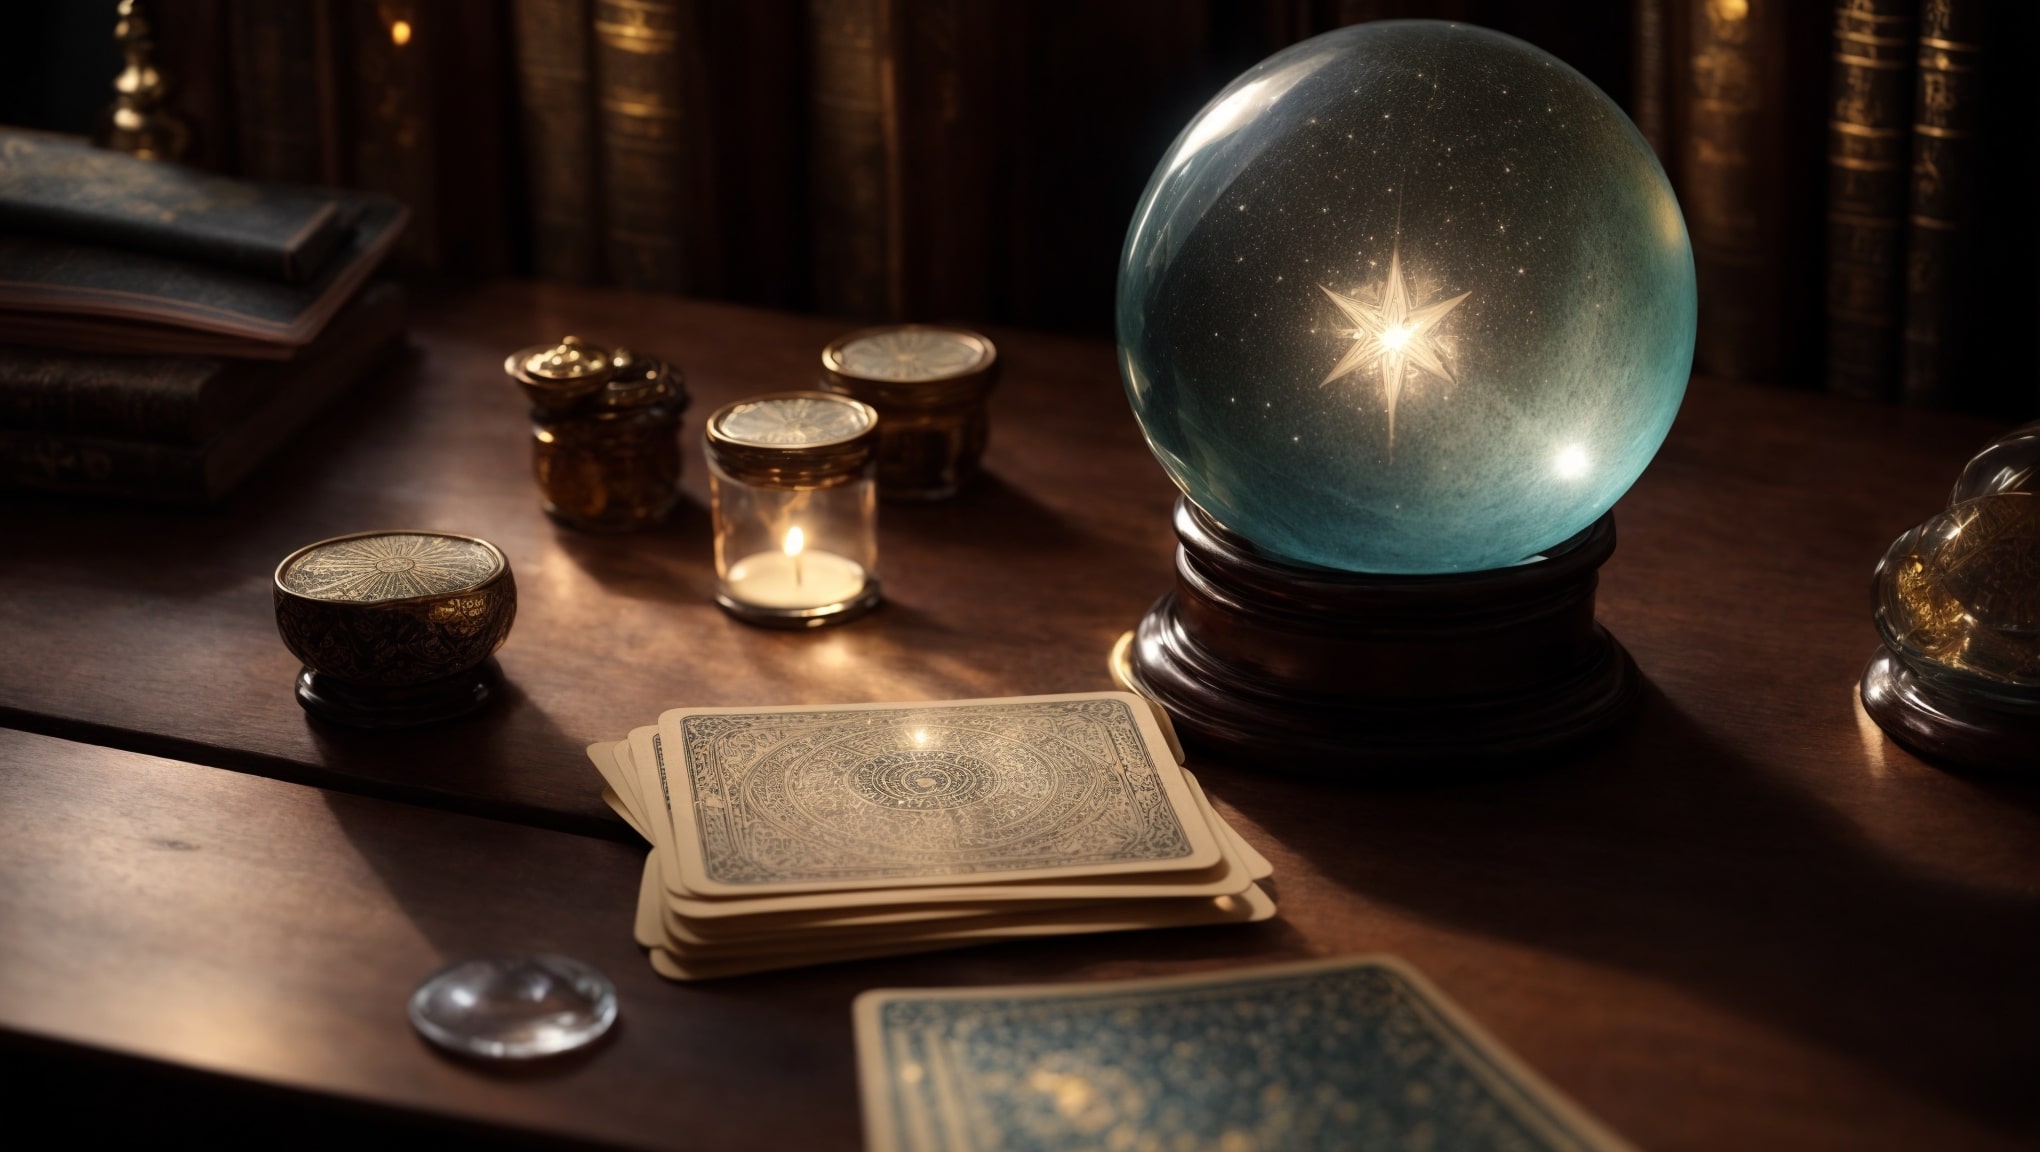 A mystical room lit by stars with an old desk, a glowing crystal ball, tarot cards for personal insight spread out, and a hand with a mystical aura hovering over them.